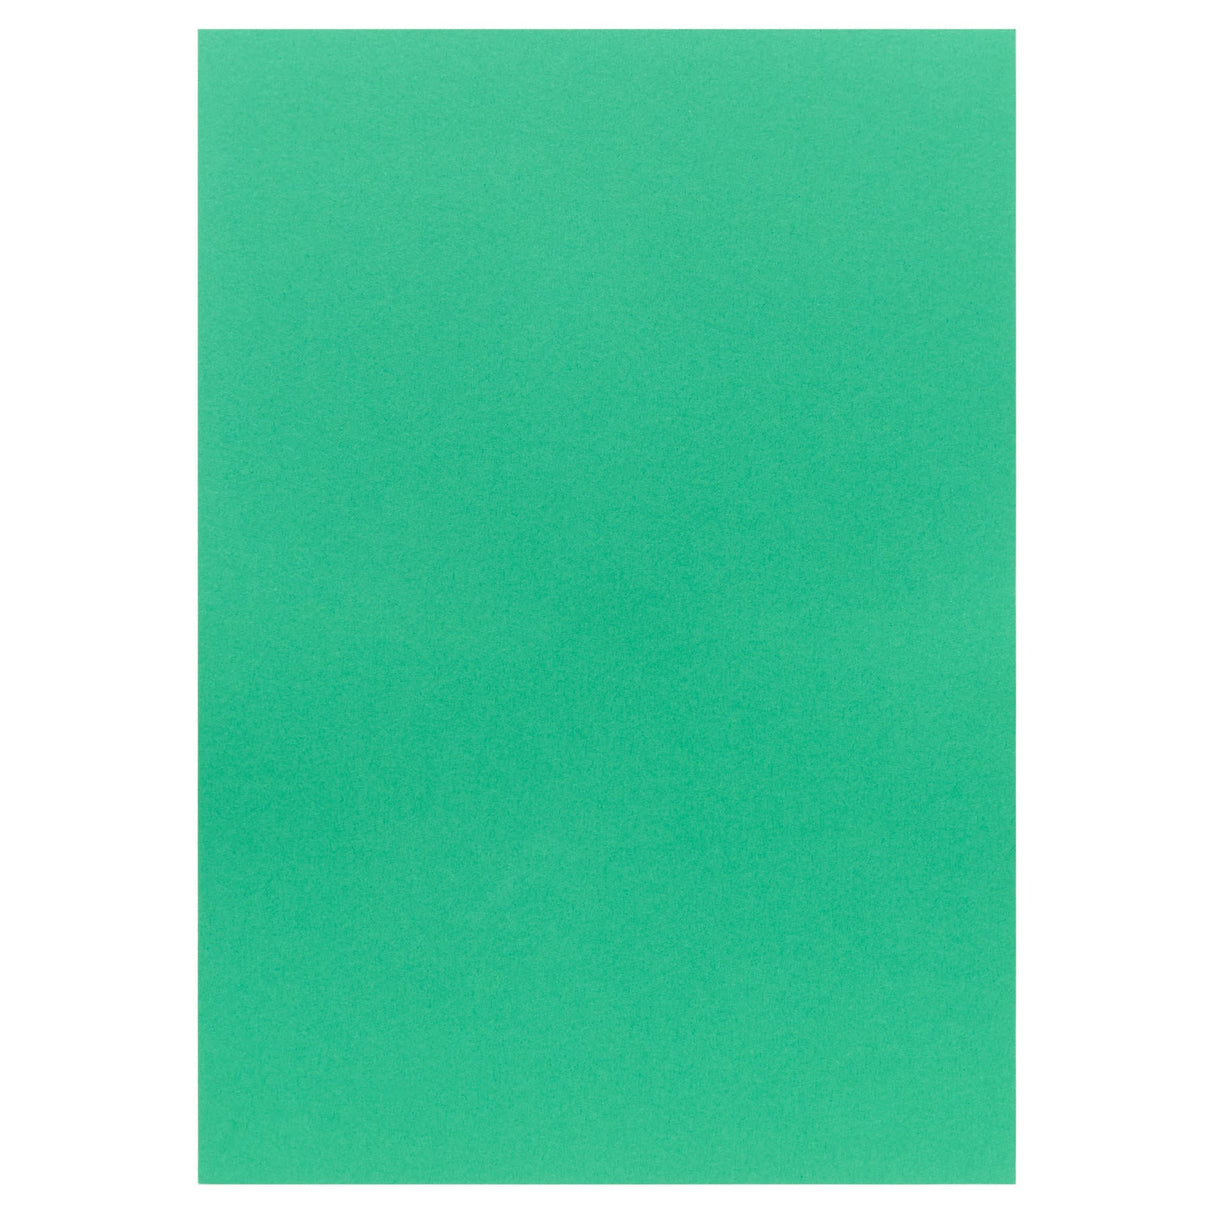 Premier Activity A4 Card - 160 gsm - Asparagus Green - 50 Sheets-Craft Paper & Card-Premier | Buy Online at Stationery Shop